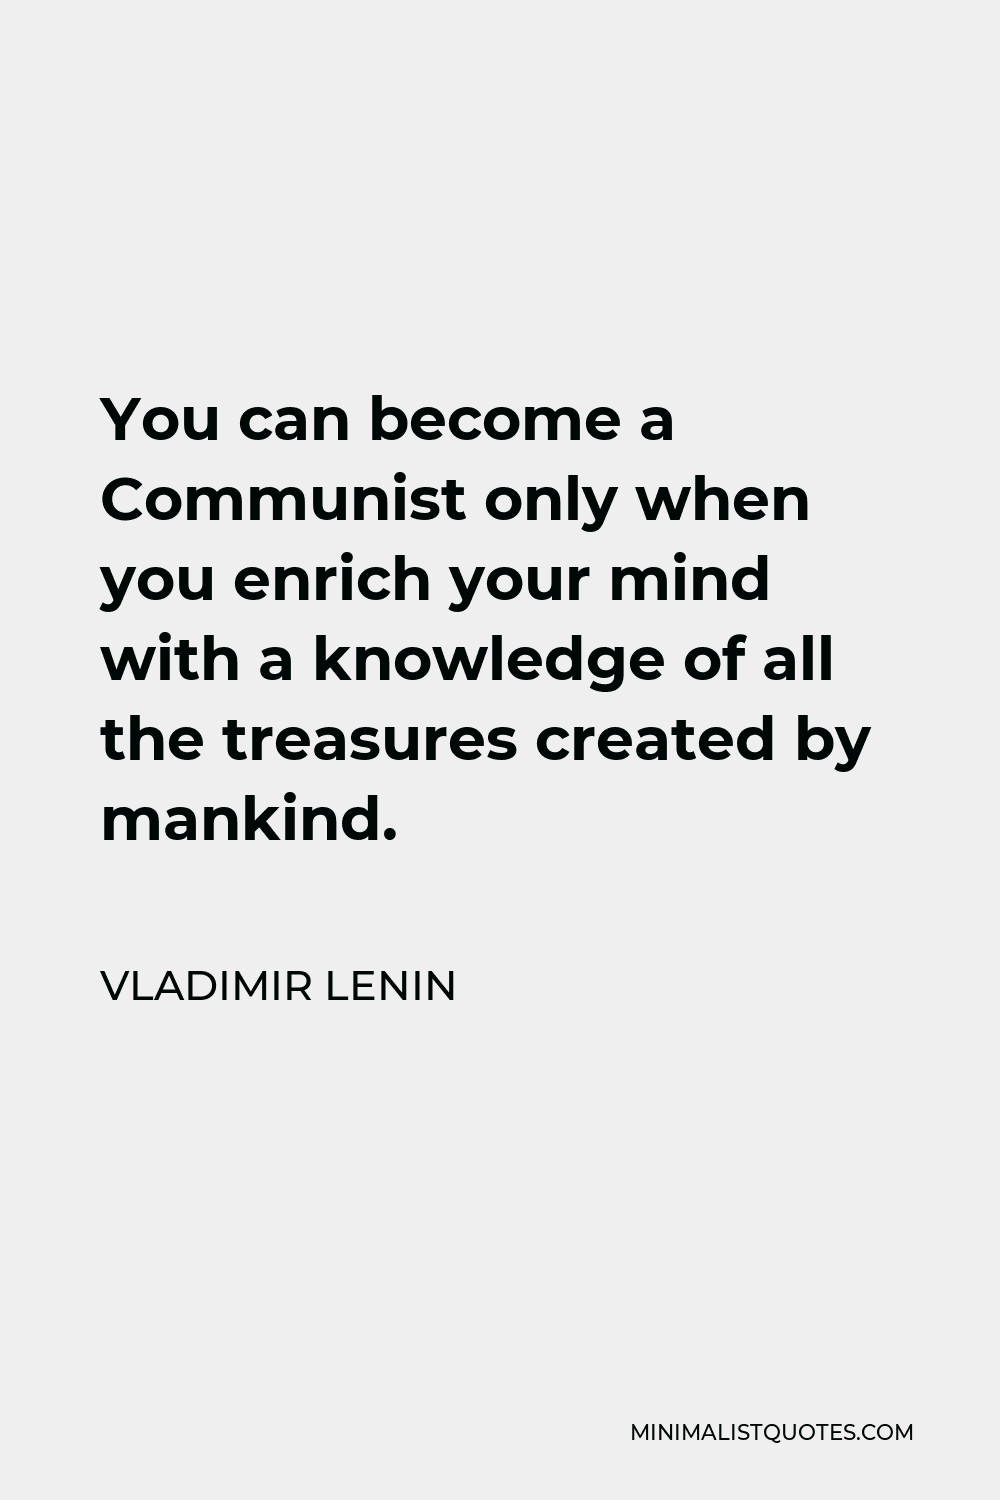 Vladimir Lenin Quote - You can become a Communist only when you enrich your mind with a knowledge of all the treasures created by mankind.